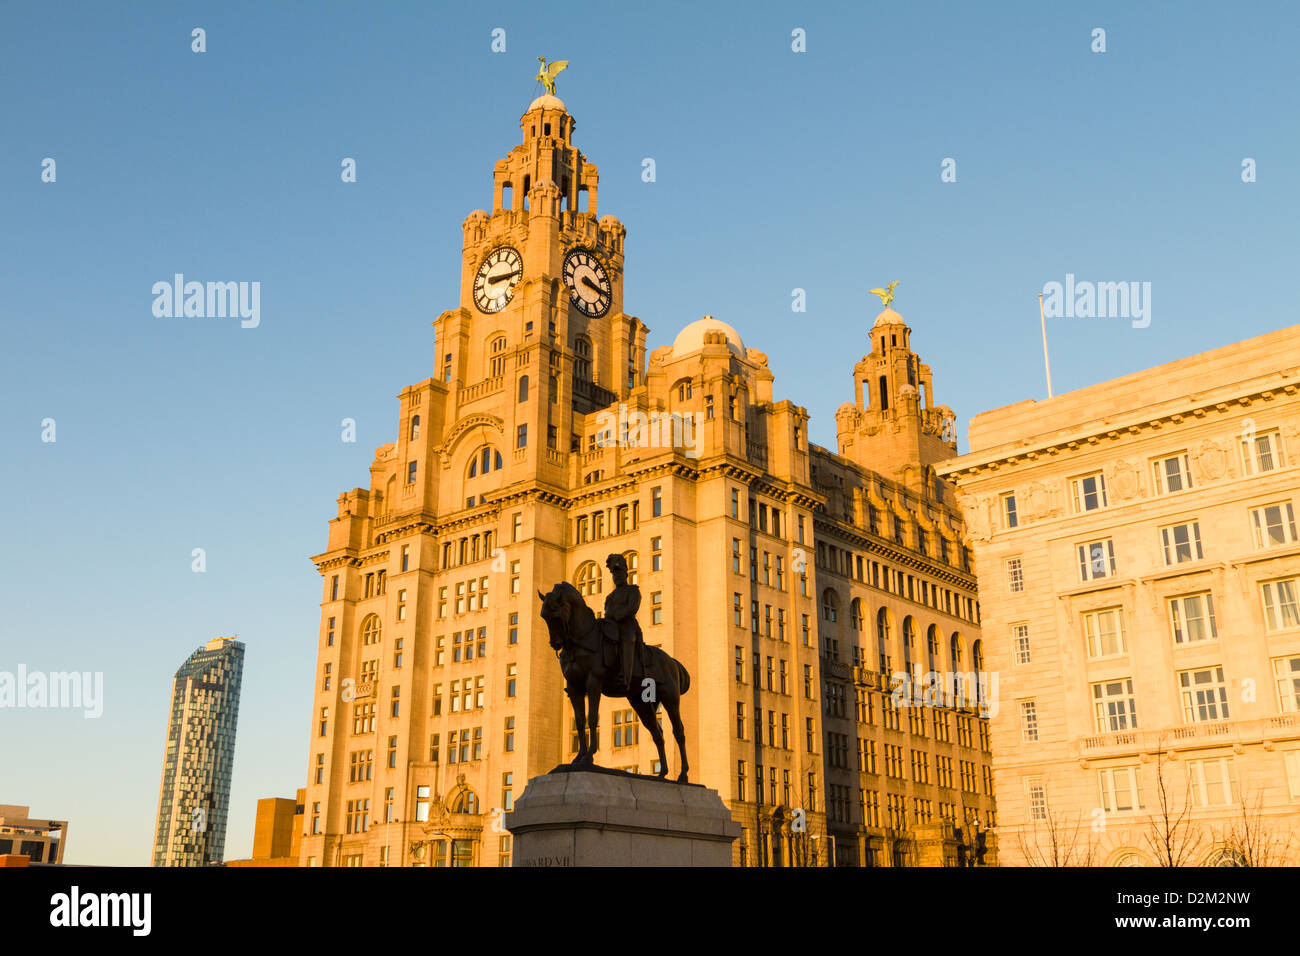 Liver Buildings and statue of Edward VII, Liverpool, England Stock Photo